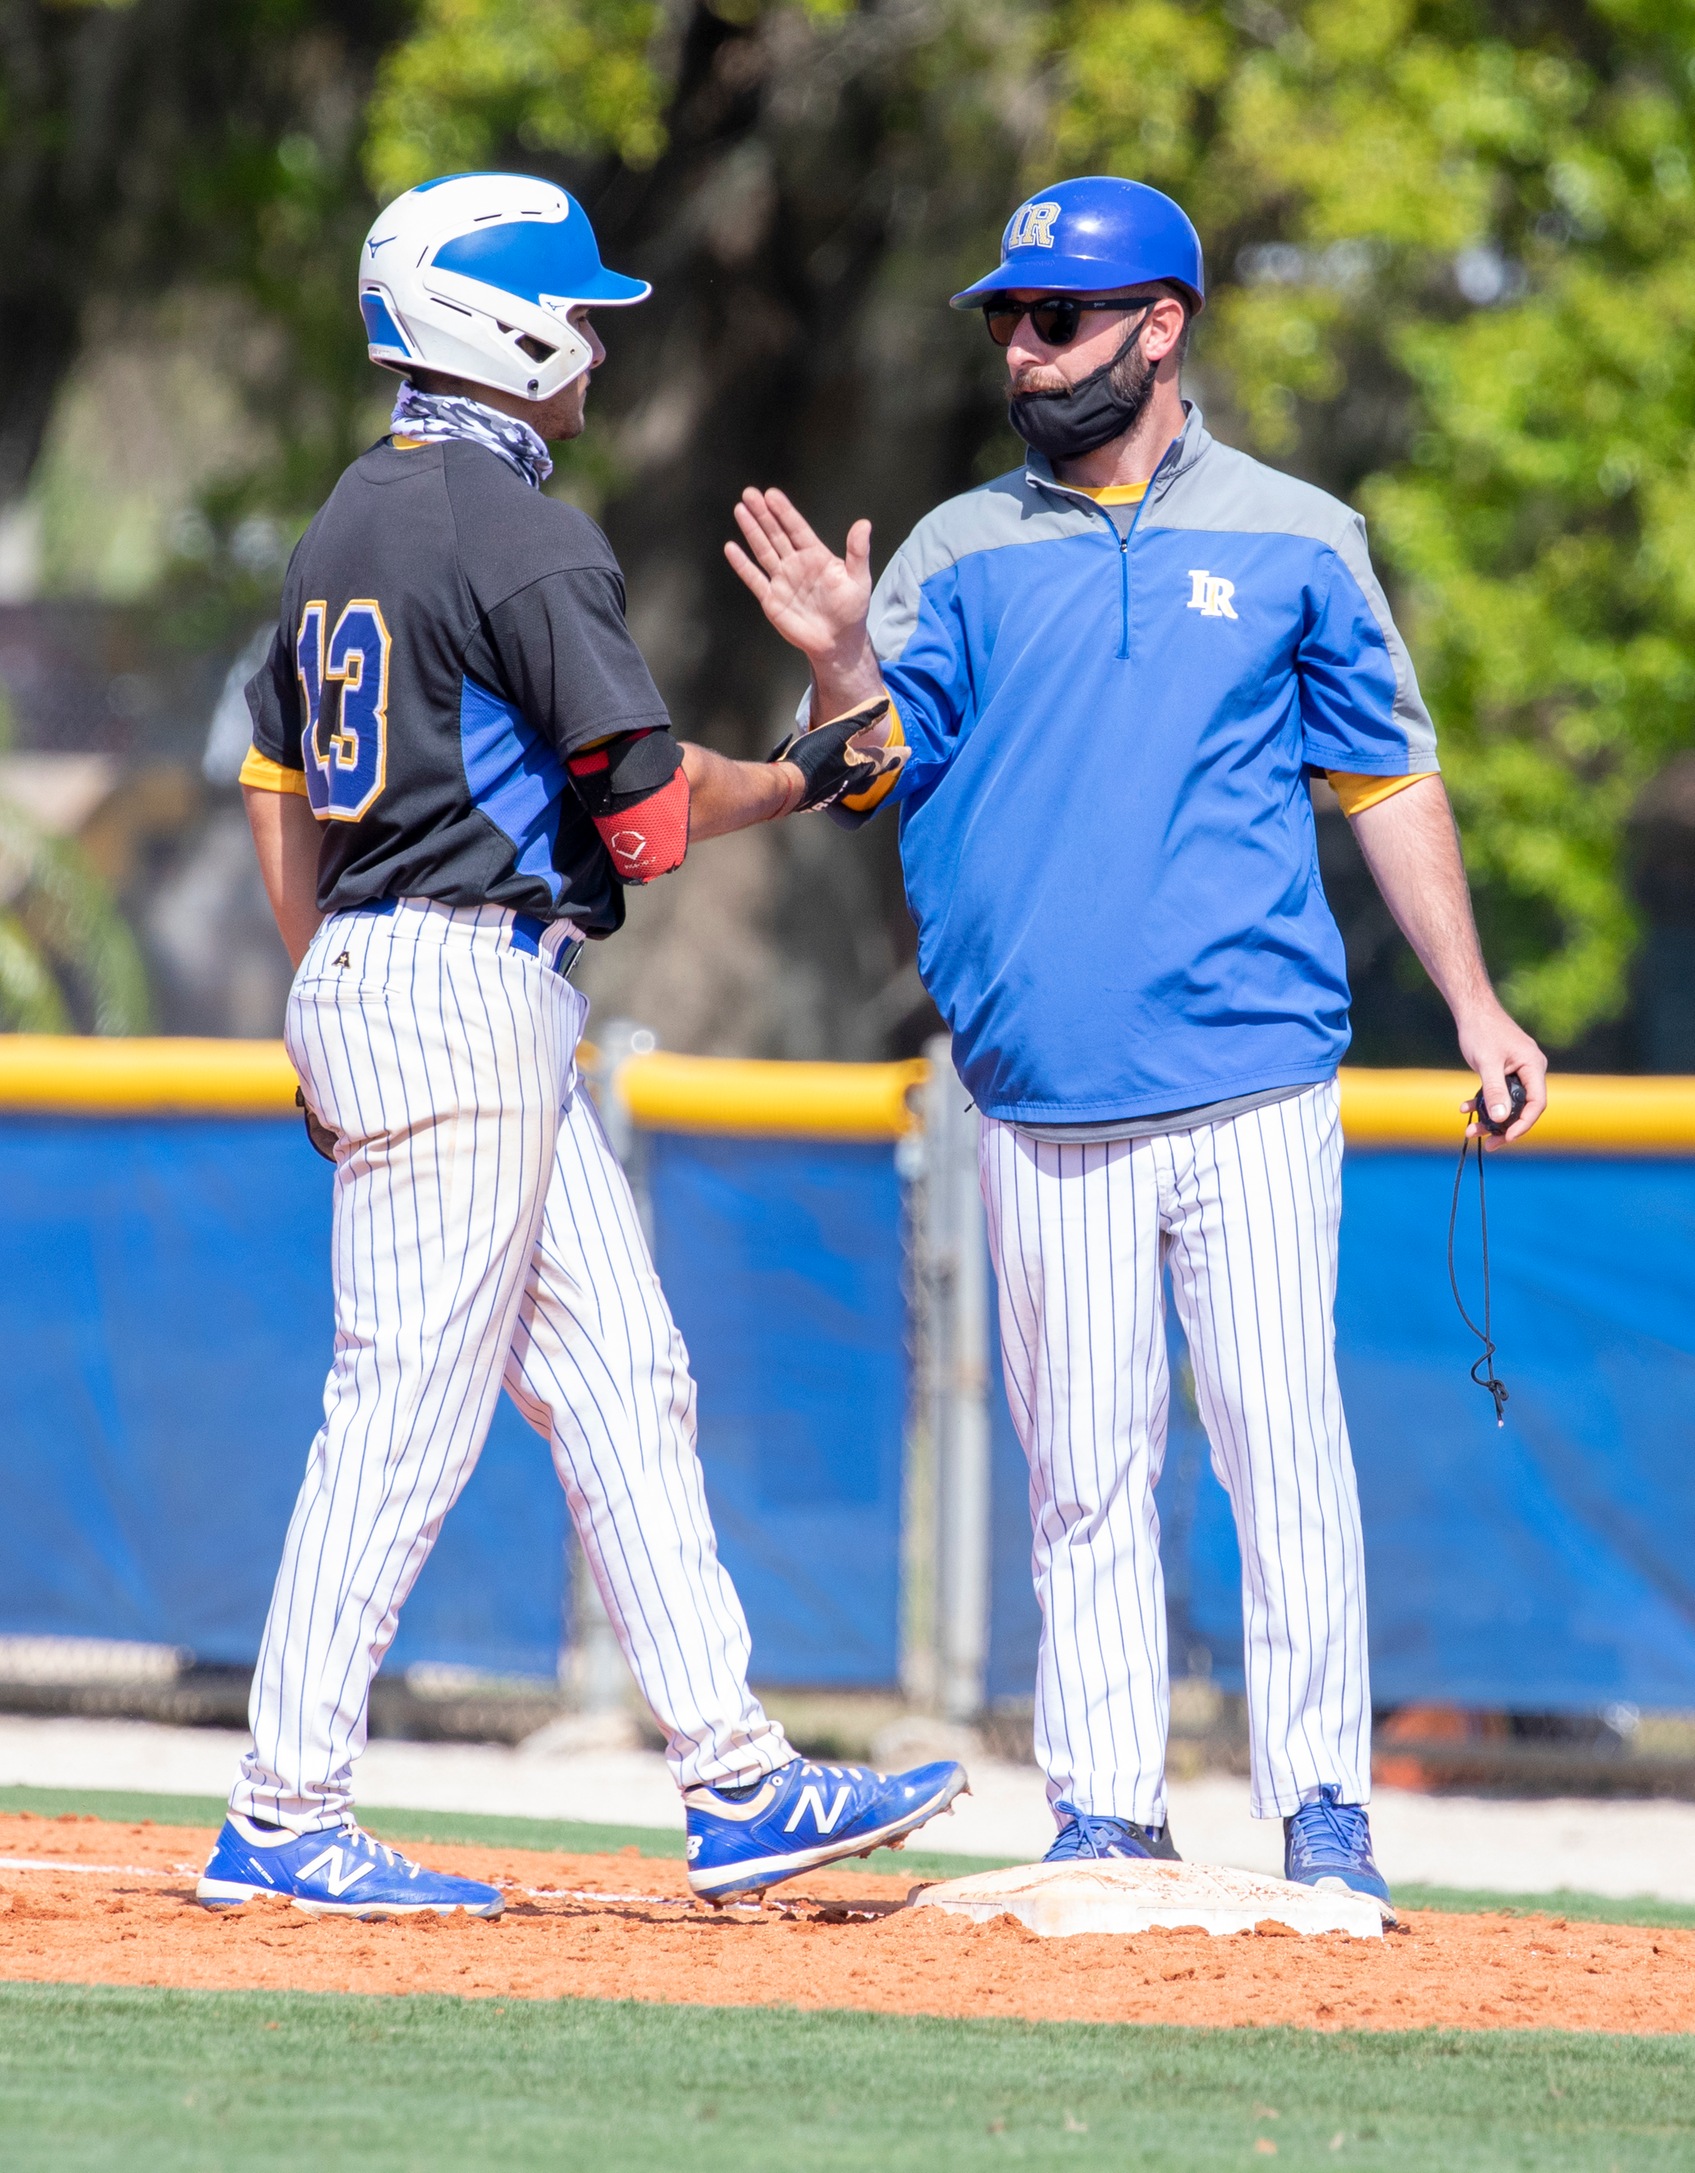 Indian River State College Pioneers Grabs Lead in Sixth Inning to Defeat ASA